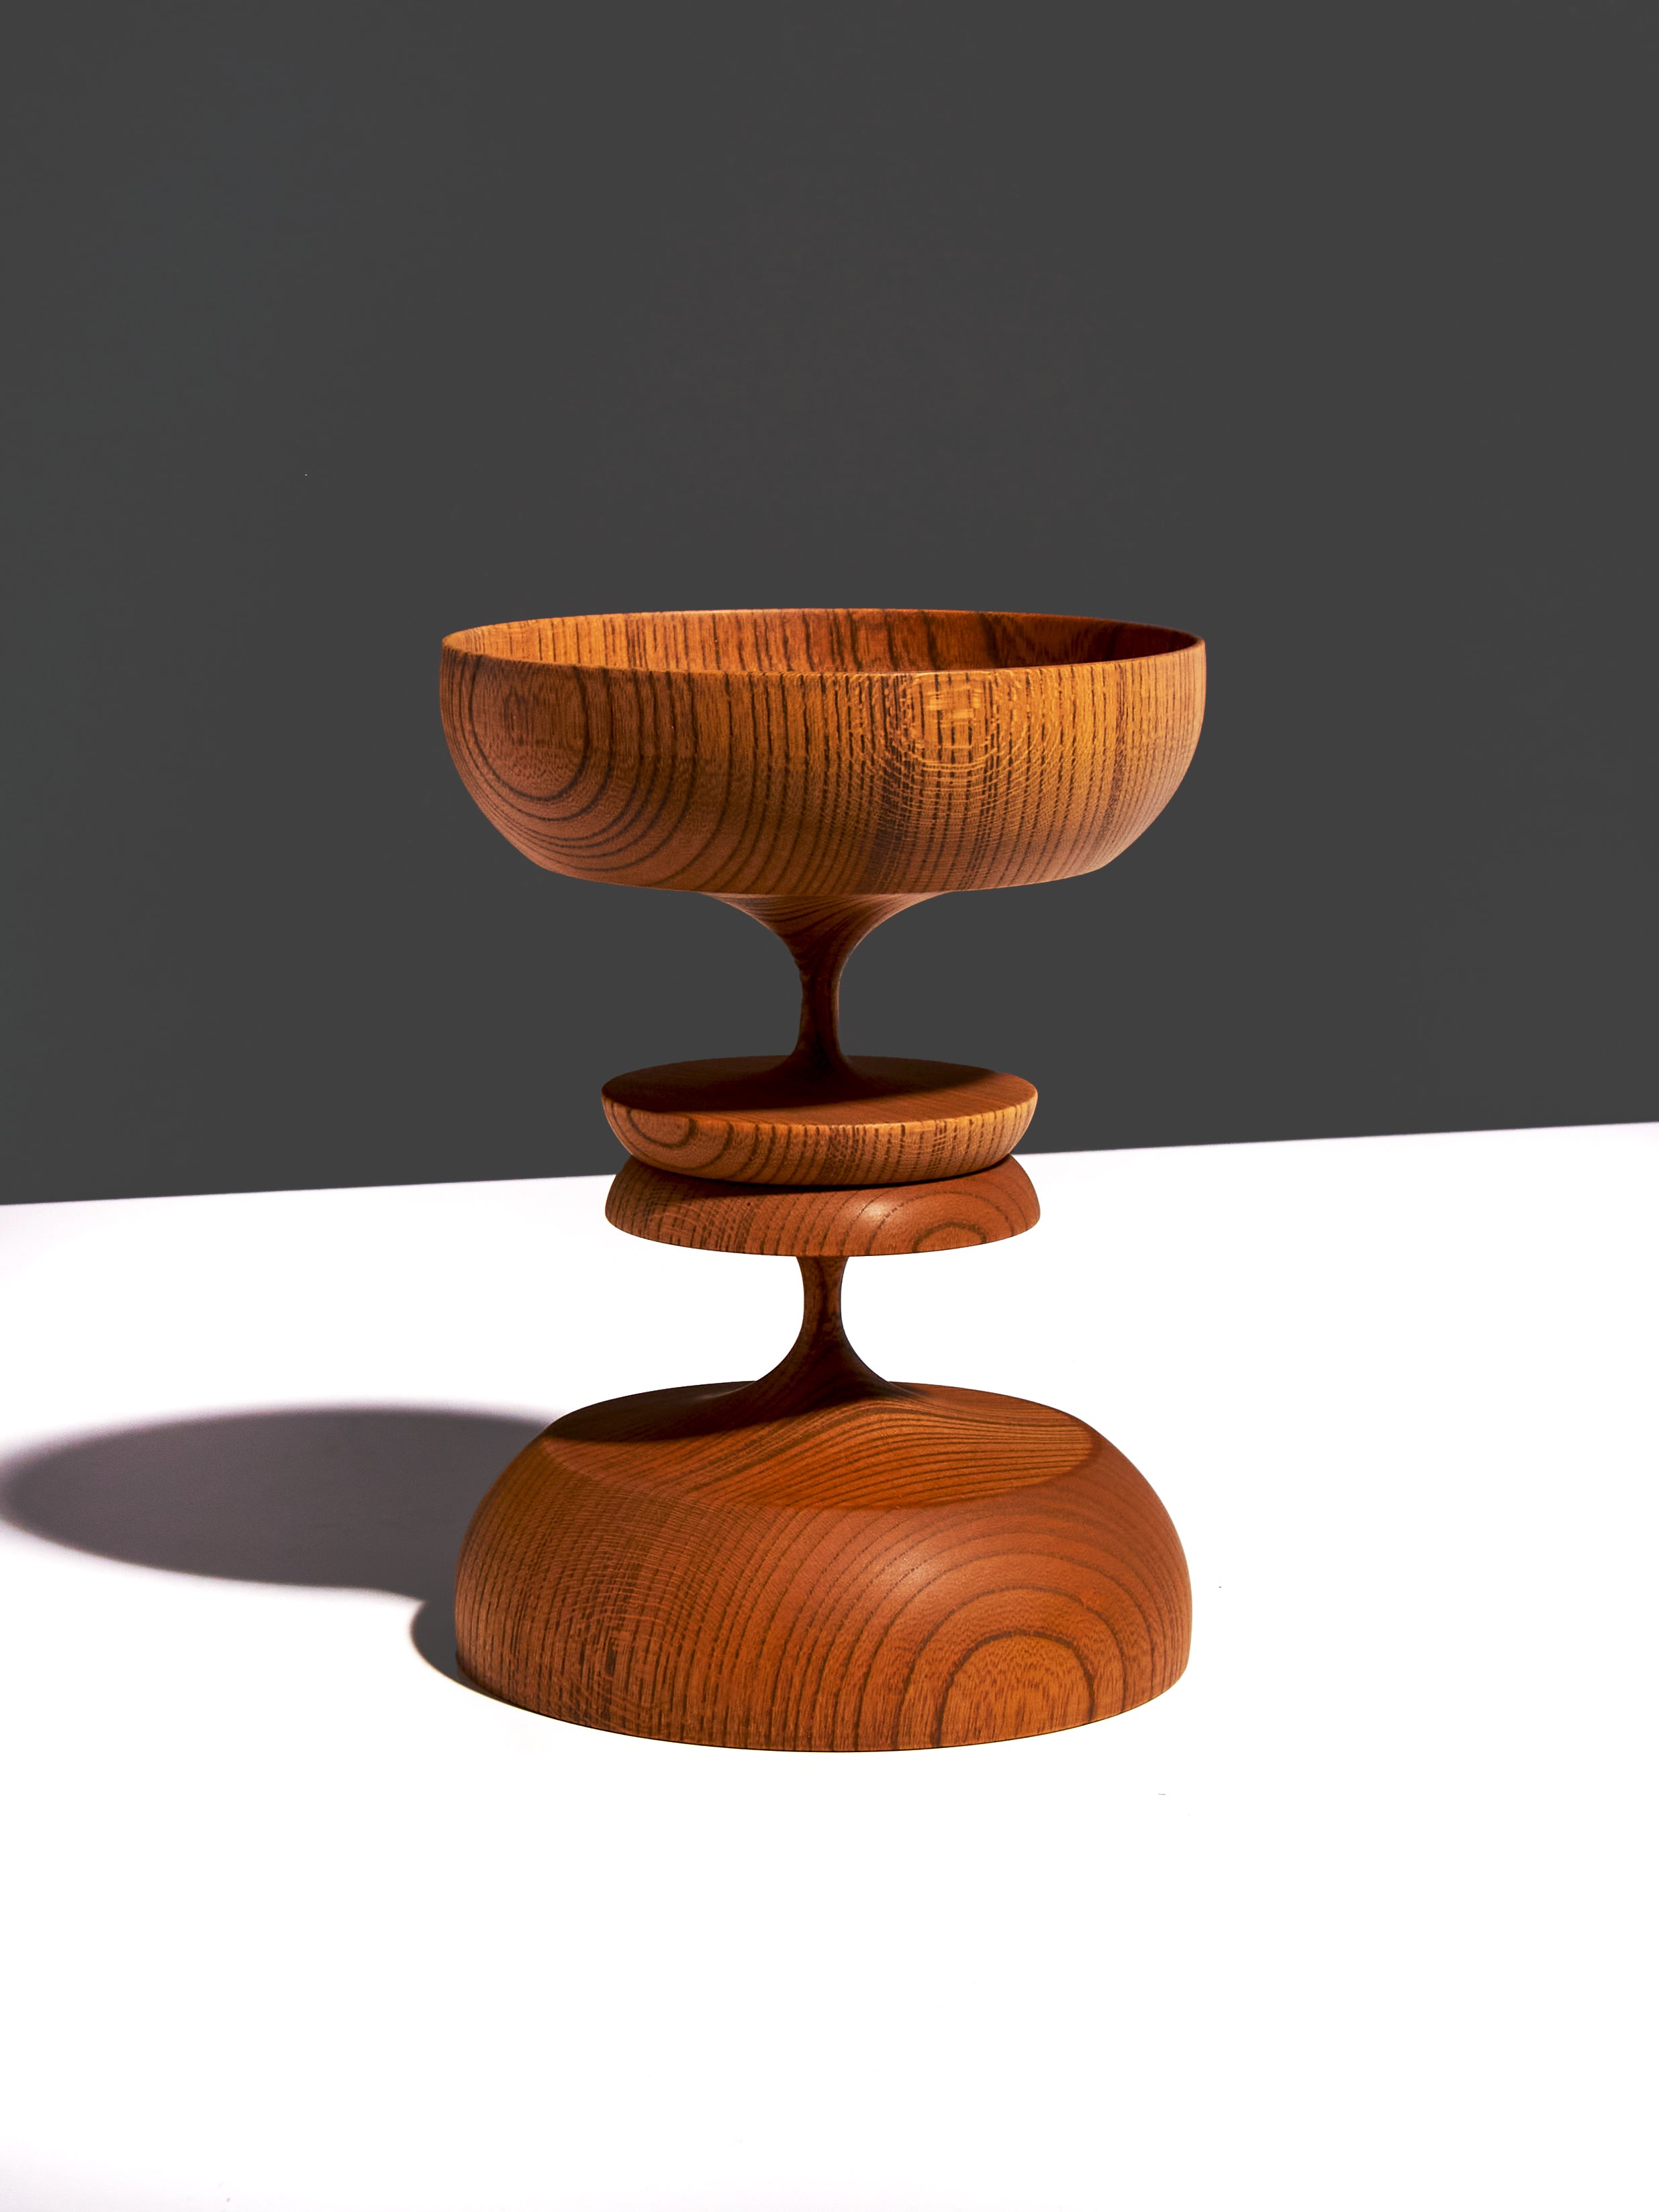 WINTER SALE 15% OFF - SINAFU HAND CARVED WOOD BOWLS